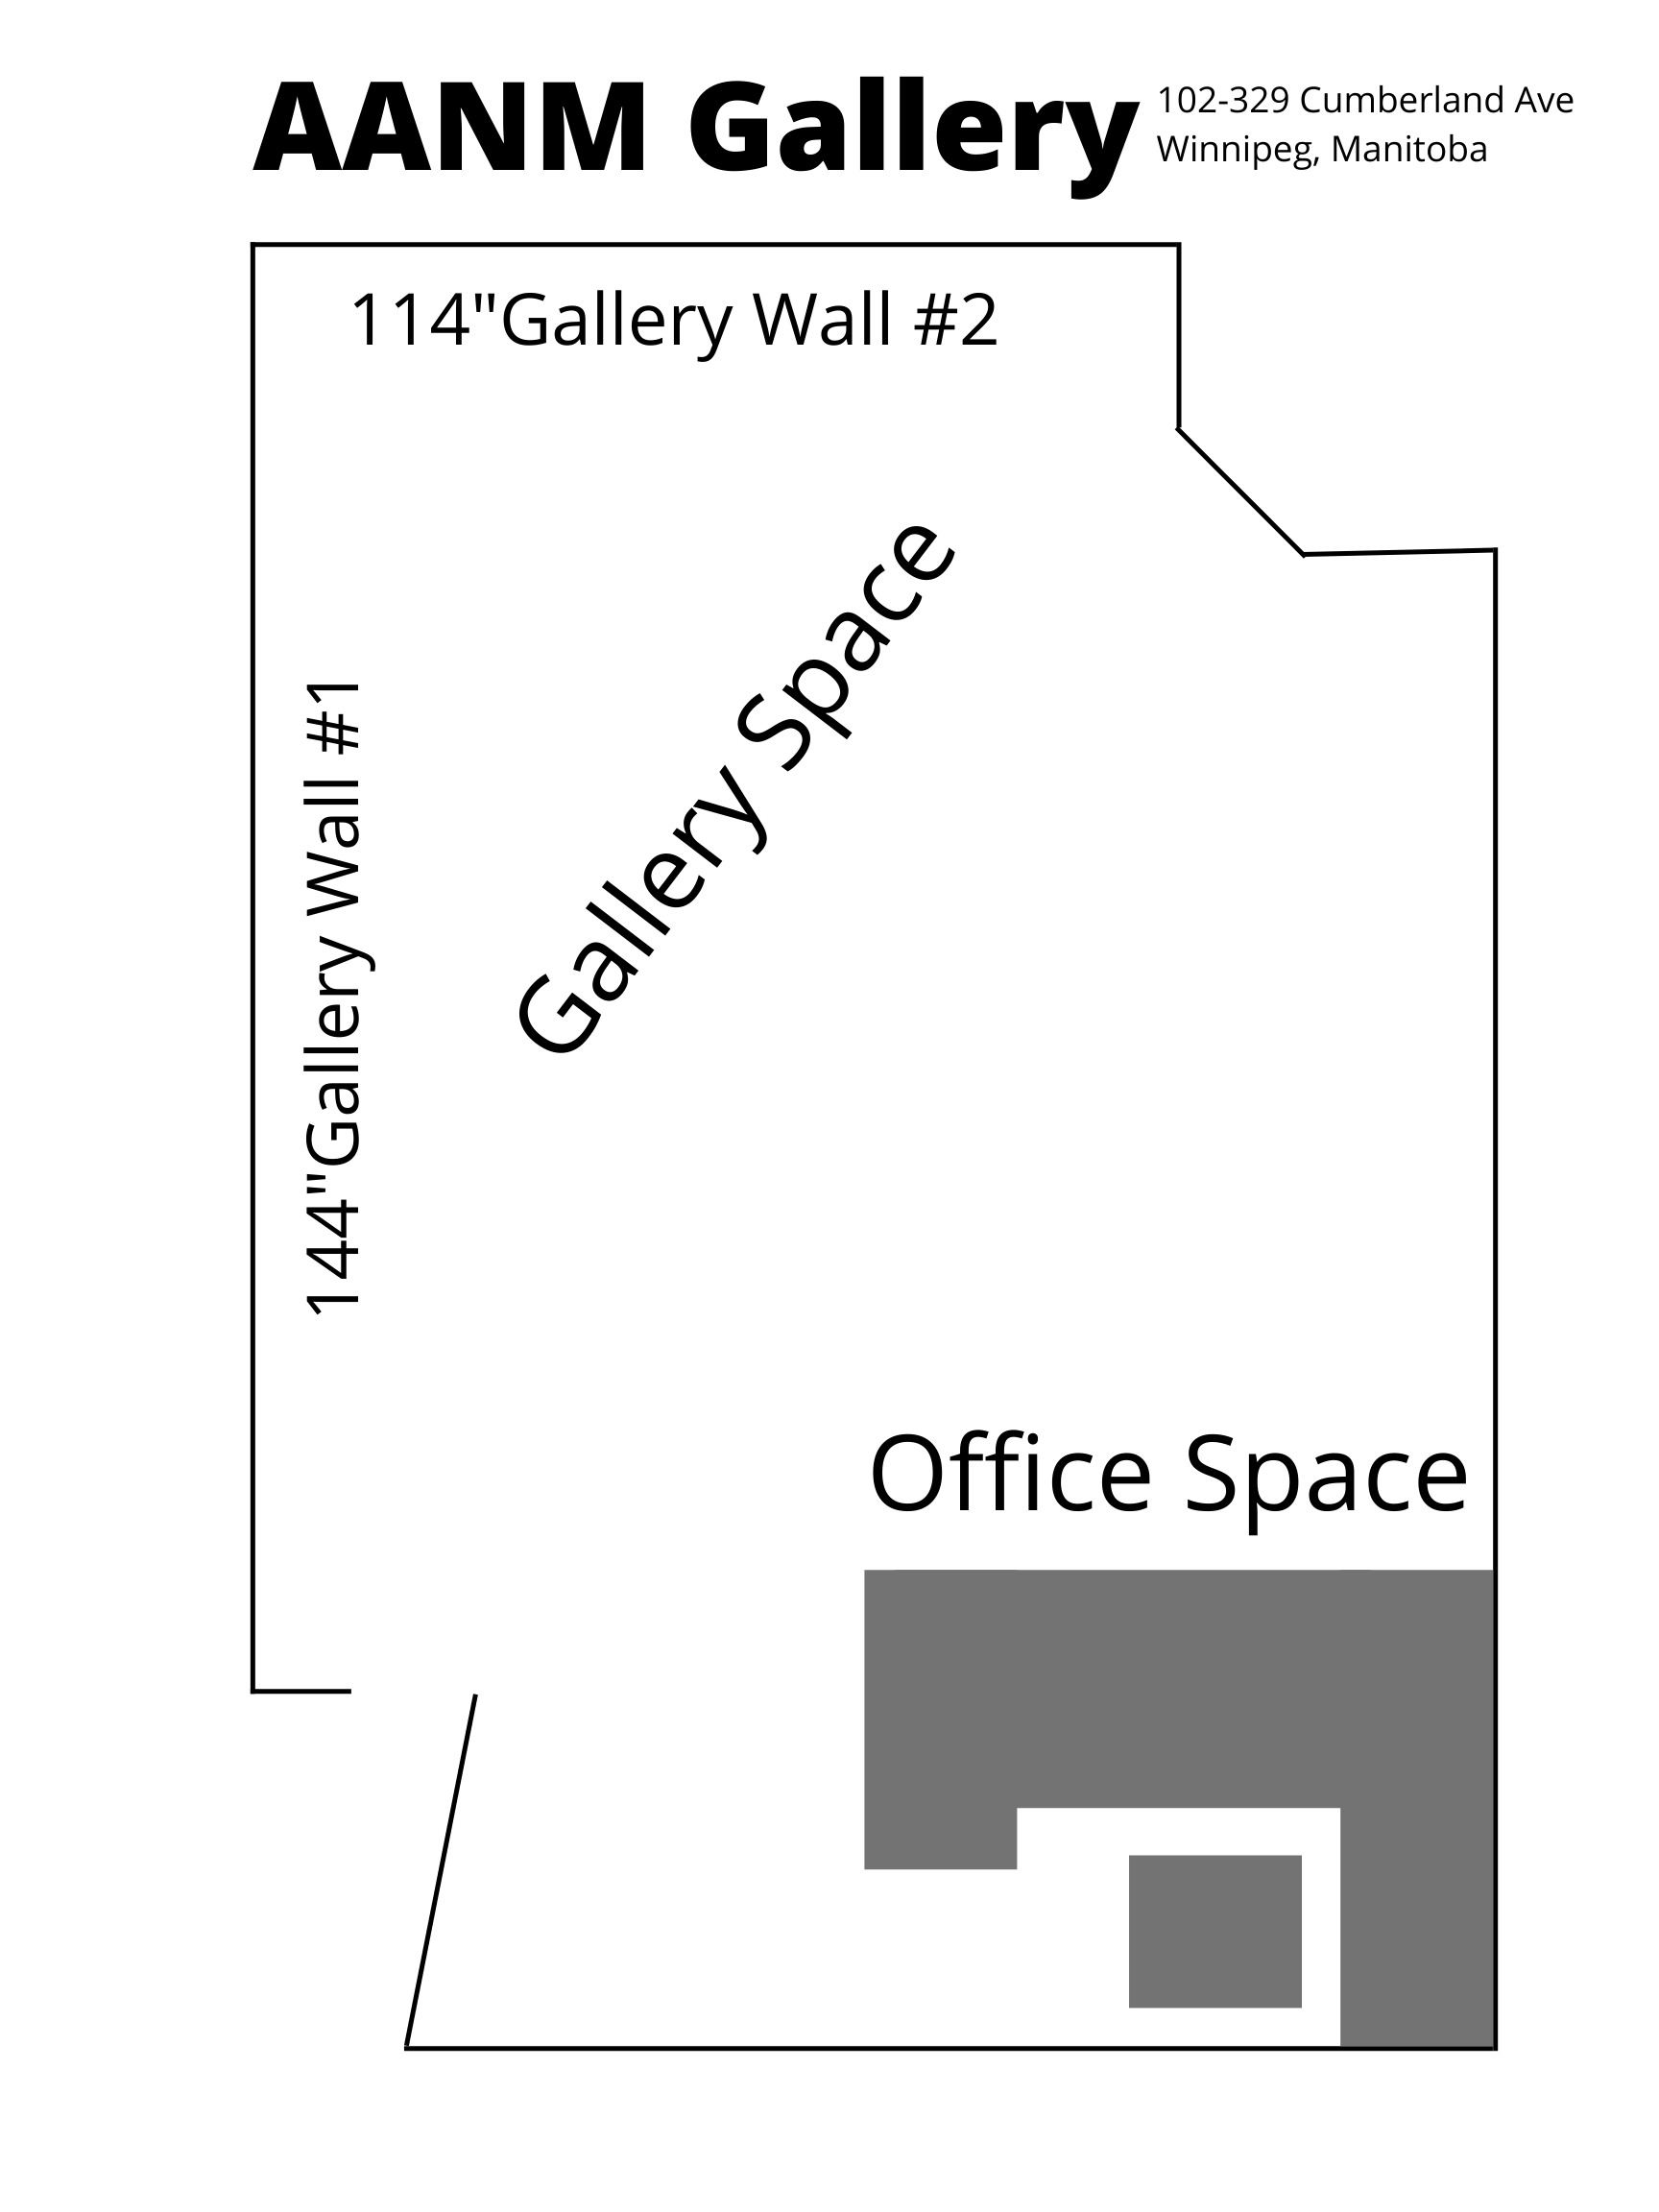 This is a black on white blueprint describing the AANM Gallery/Office space layout.  Gallery Wall #1 is 144" long.  Gallery Wall #2 is 114" long.